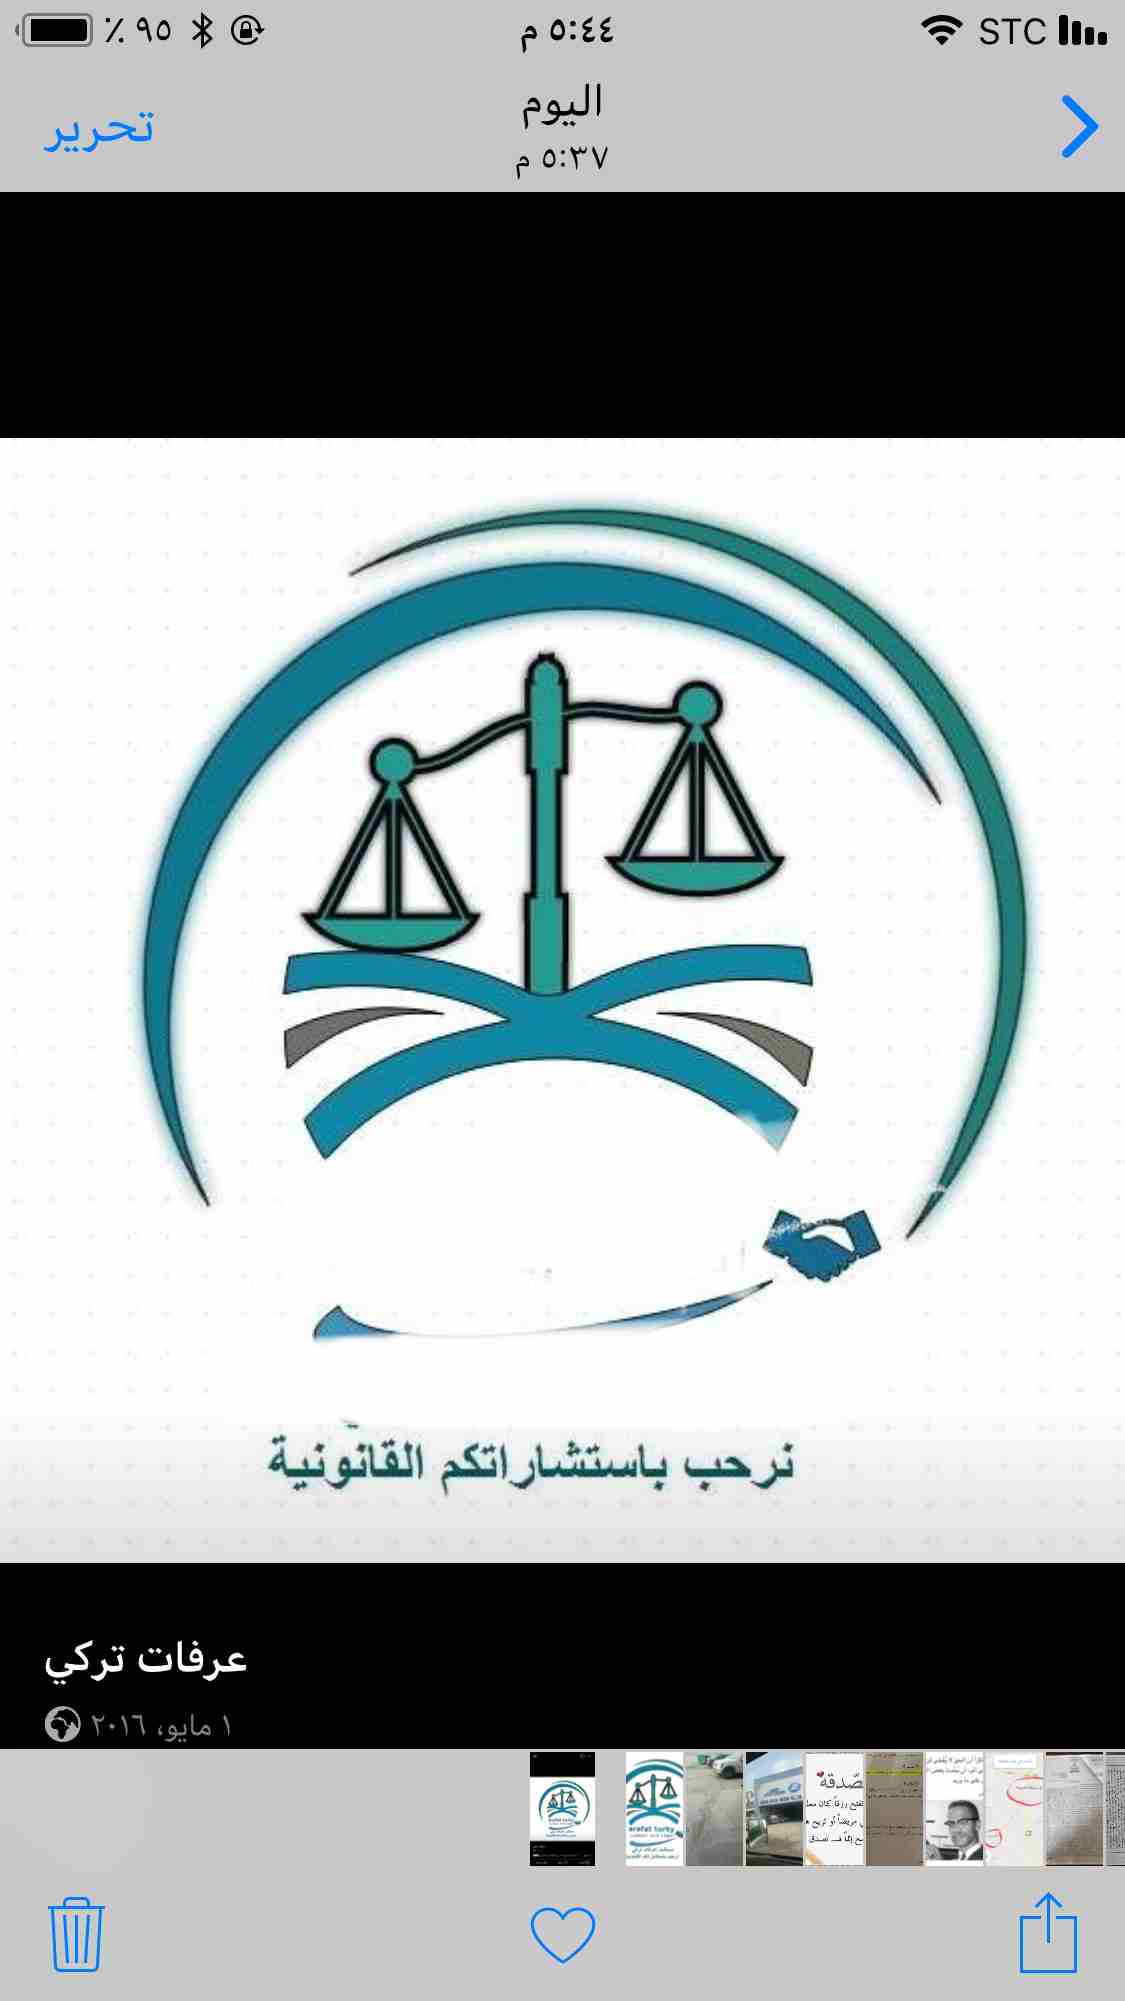 ASK THE LAW - Lawyers and Legal Consultants in Dubai - Debt CollectionLabour & Employment Lawyers by ASK THE LAW. One of the top Labour Lawyers in Dubai / E-  محامي ومستشار قانوني لا...